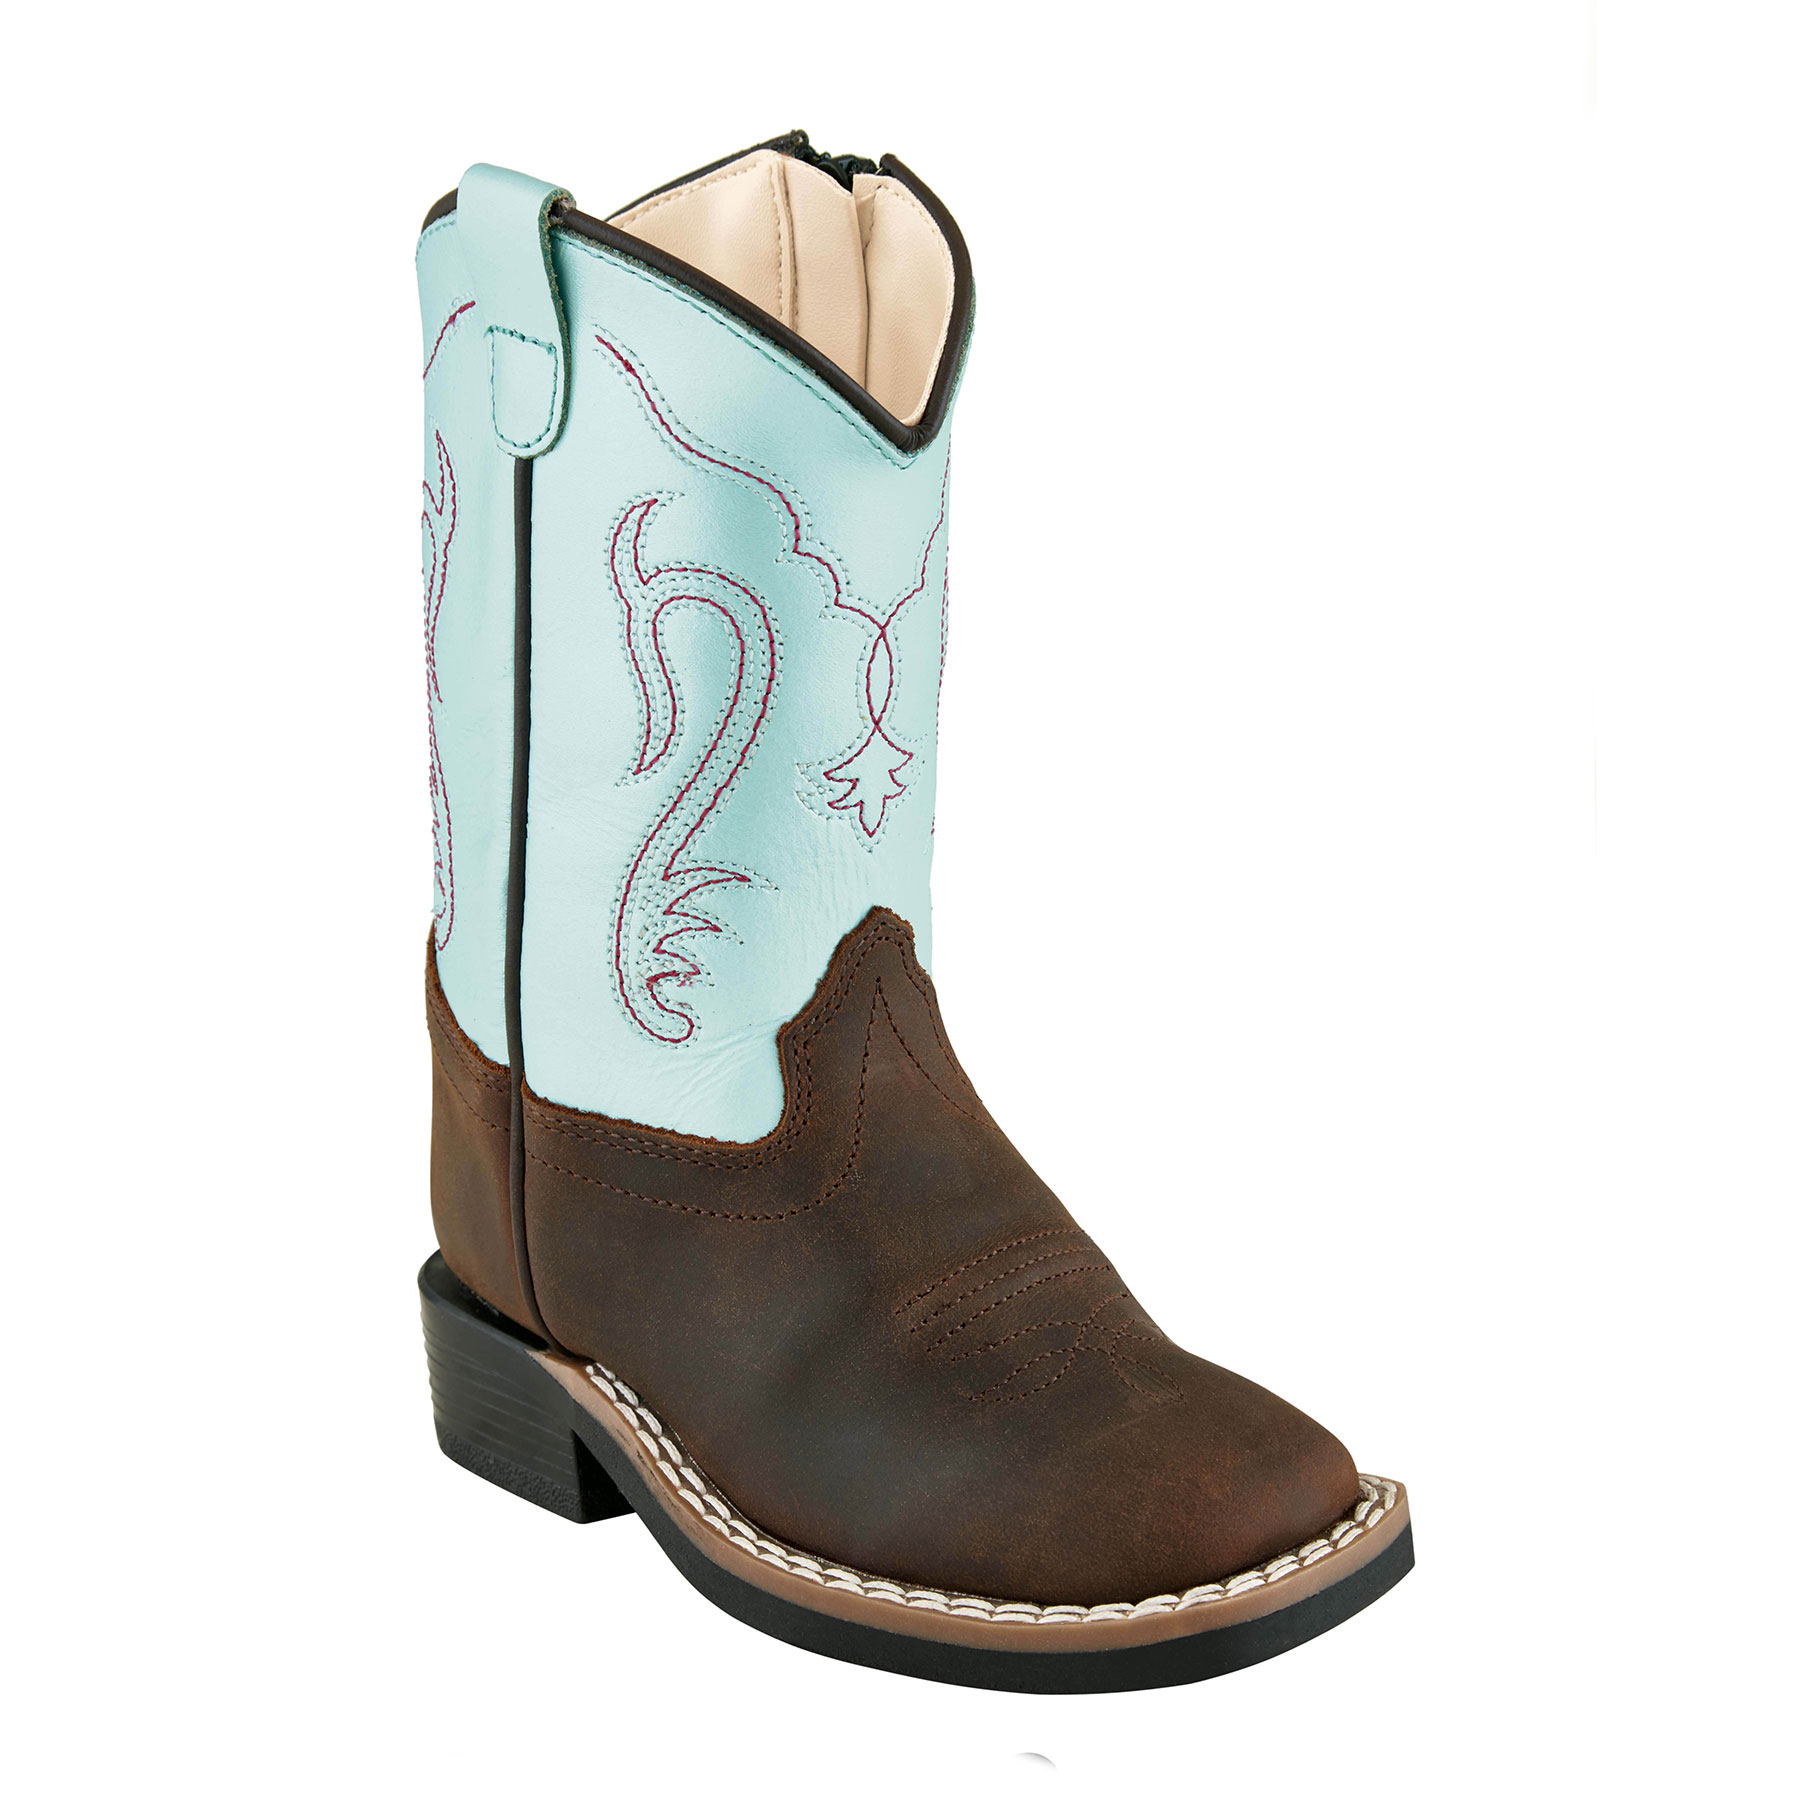 Pungo Ridge - Old West Toddler's Square Toe Boots - Brown/Light Blue ...